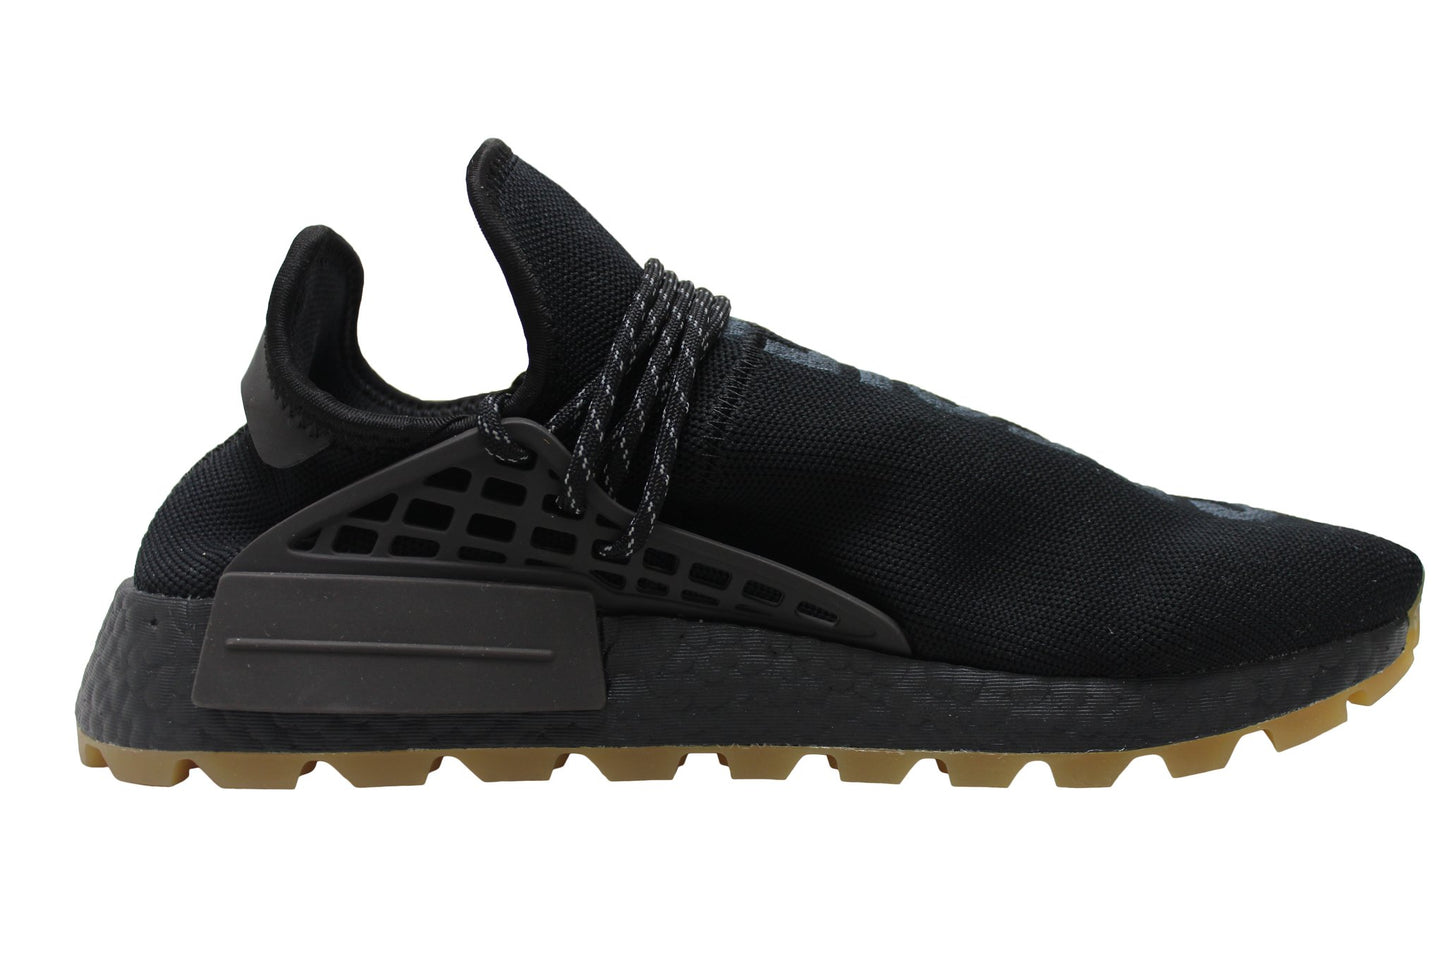 Pharrell x Adidas NMD PRD HU “Now Is Her Time”